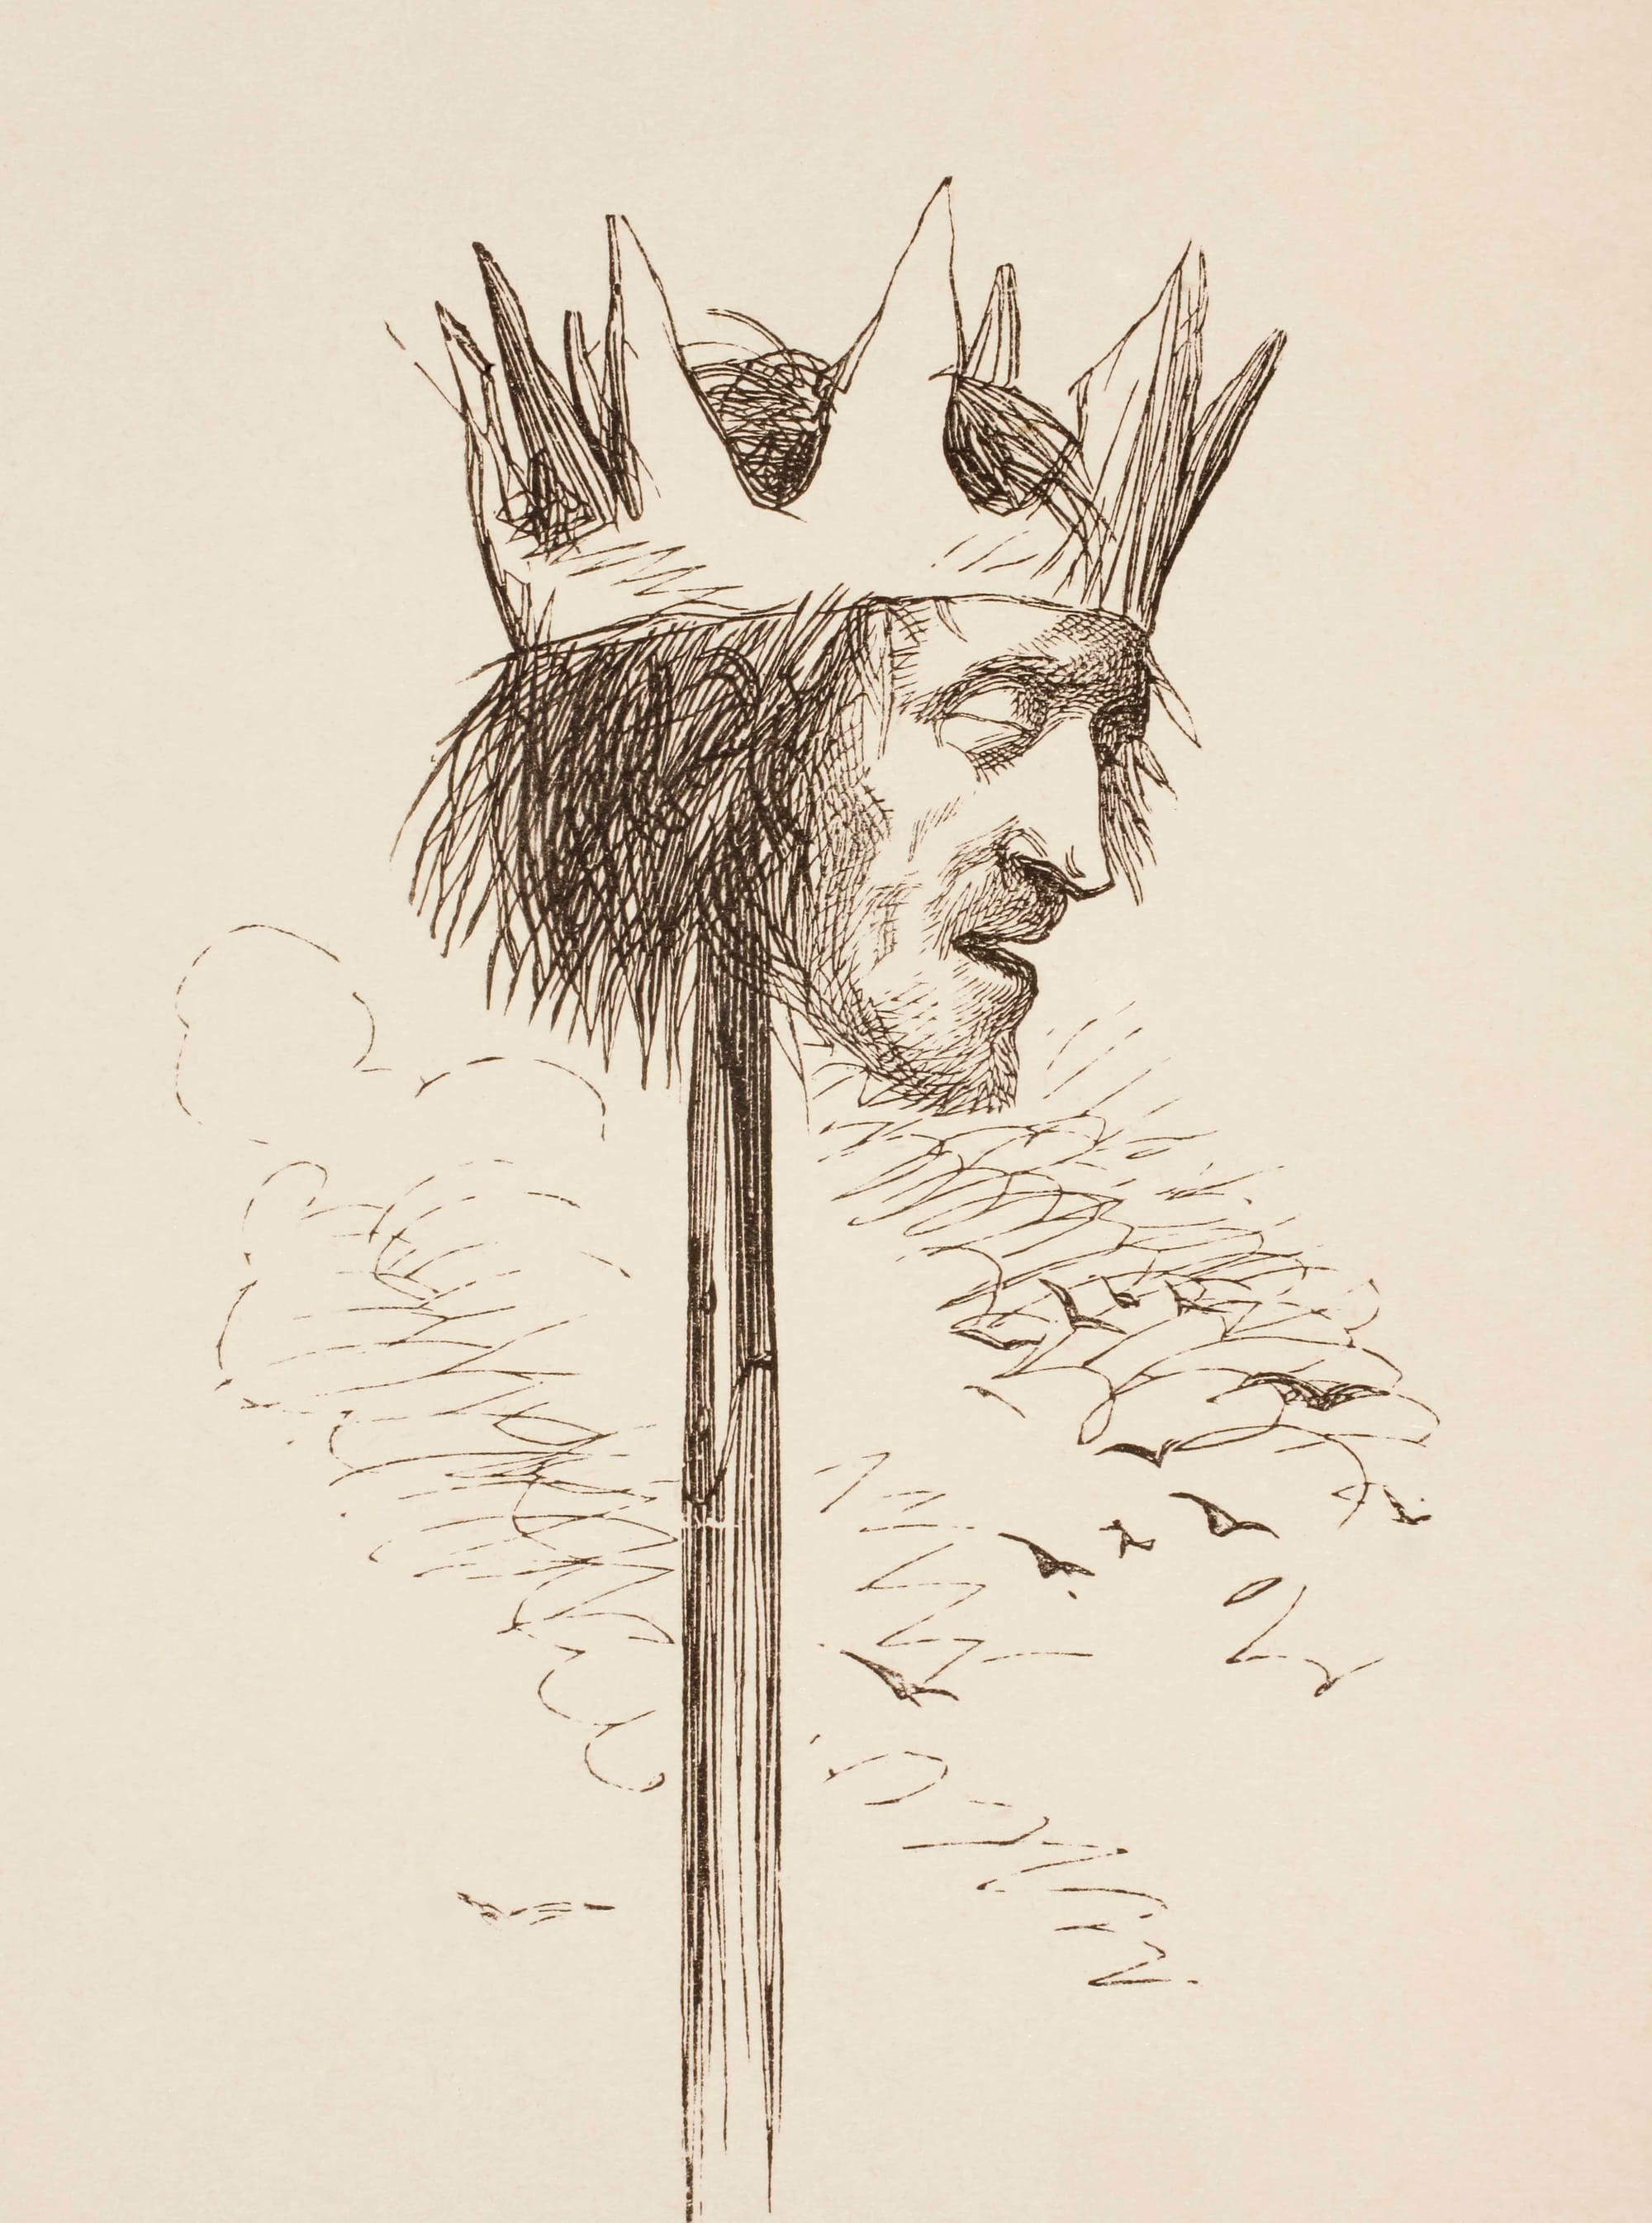 The King's head, including crown, set on a spike